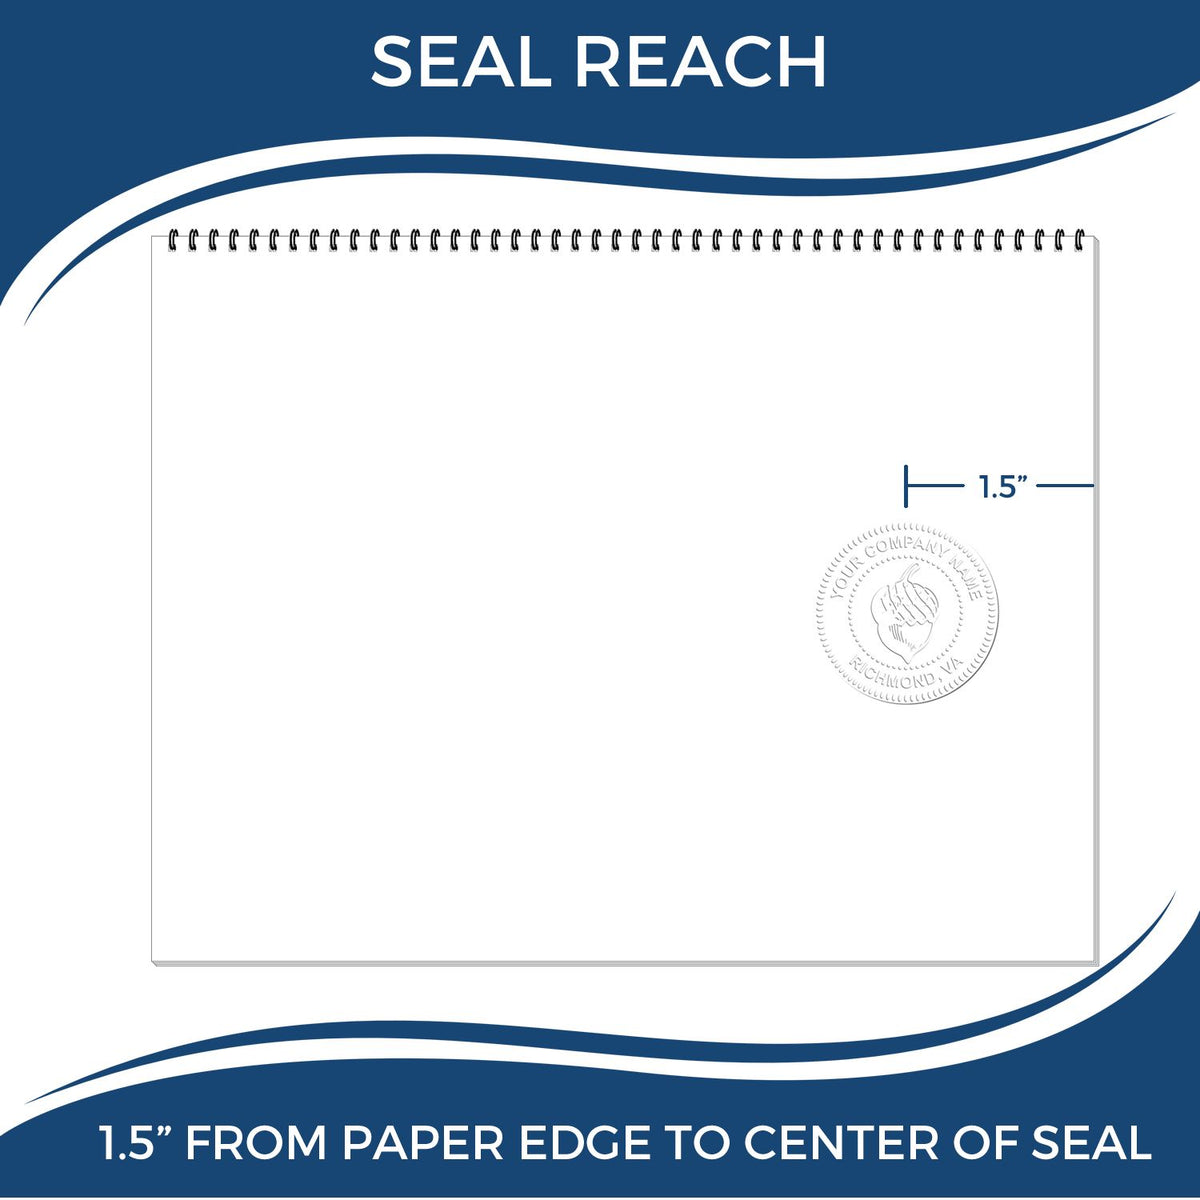 An infographic showing the seal reach which is represented by a ruler and a miniature seal image of the Hybrid New Jersey Engineer Seal